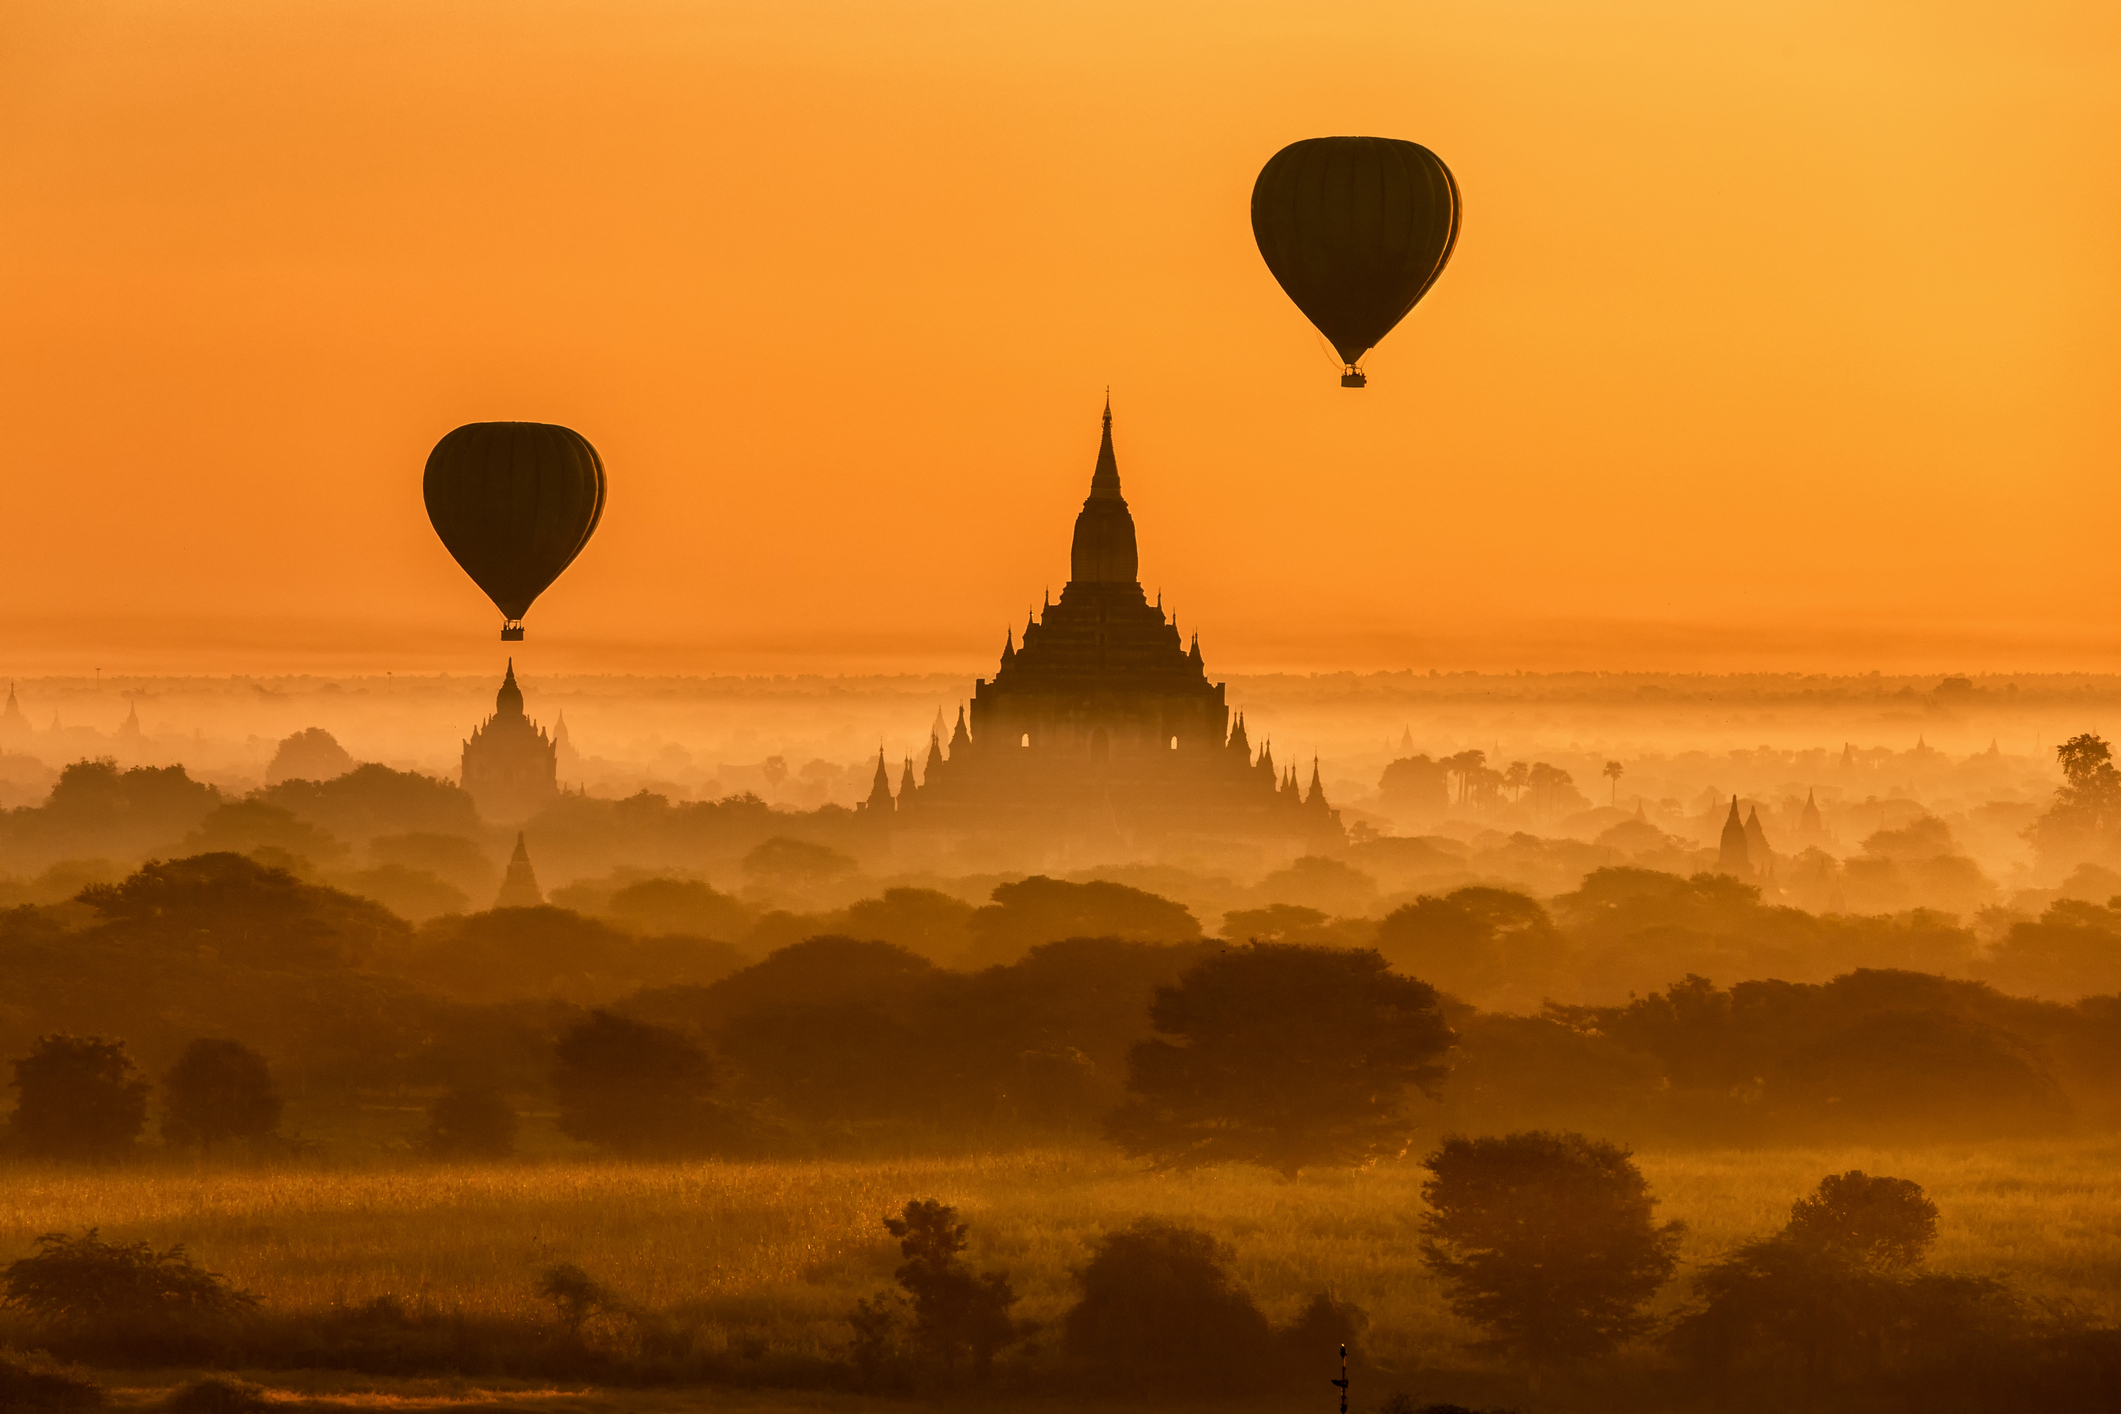 Hot-air balloons rising over the dawn sky at Bagan with a Pagoda in the background